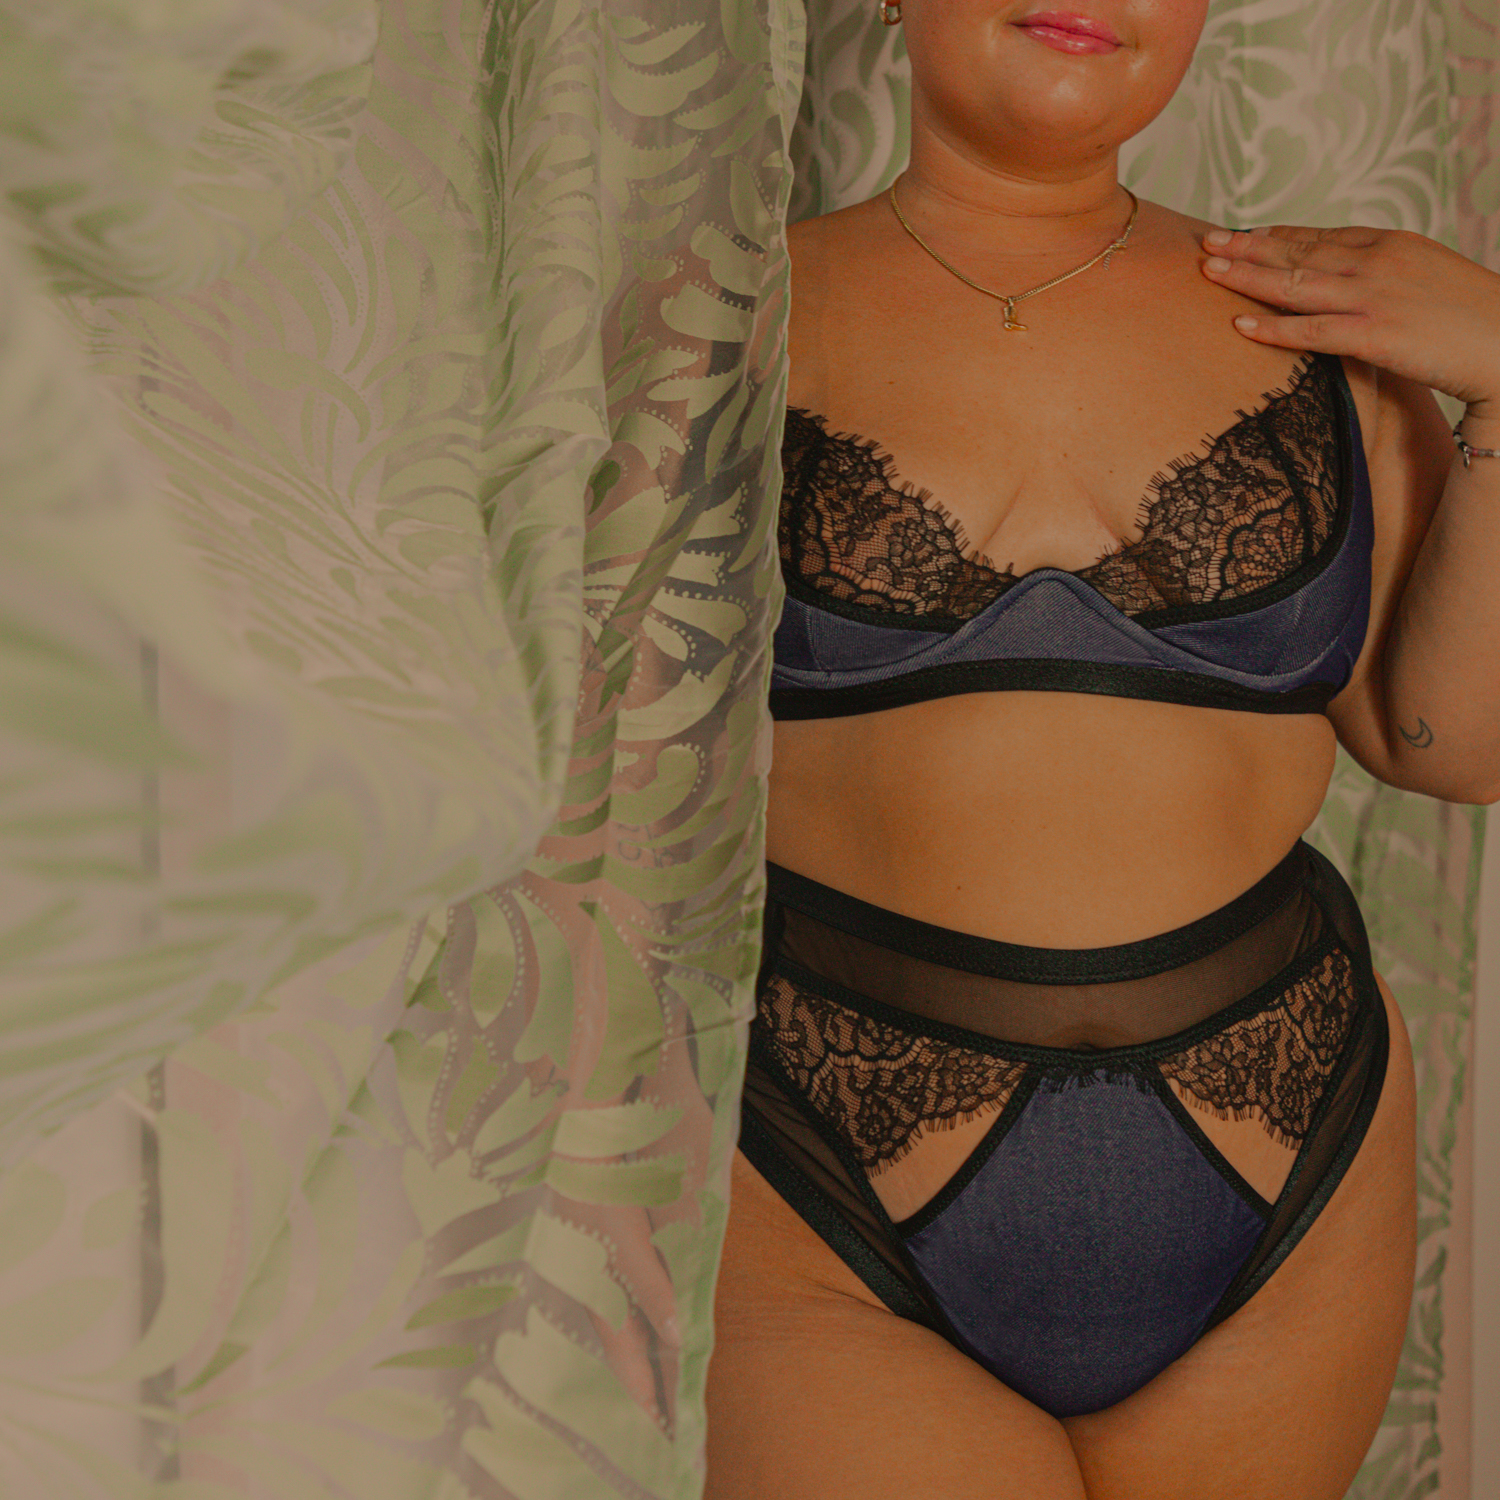 S9833  Misses' and Women's Bra, Panty and Thong by Madalynne